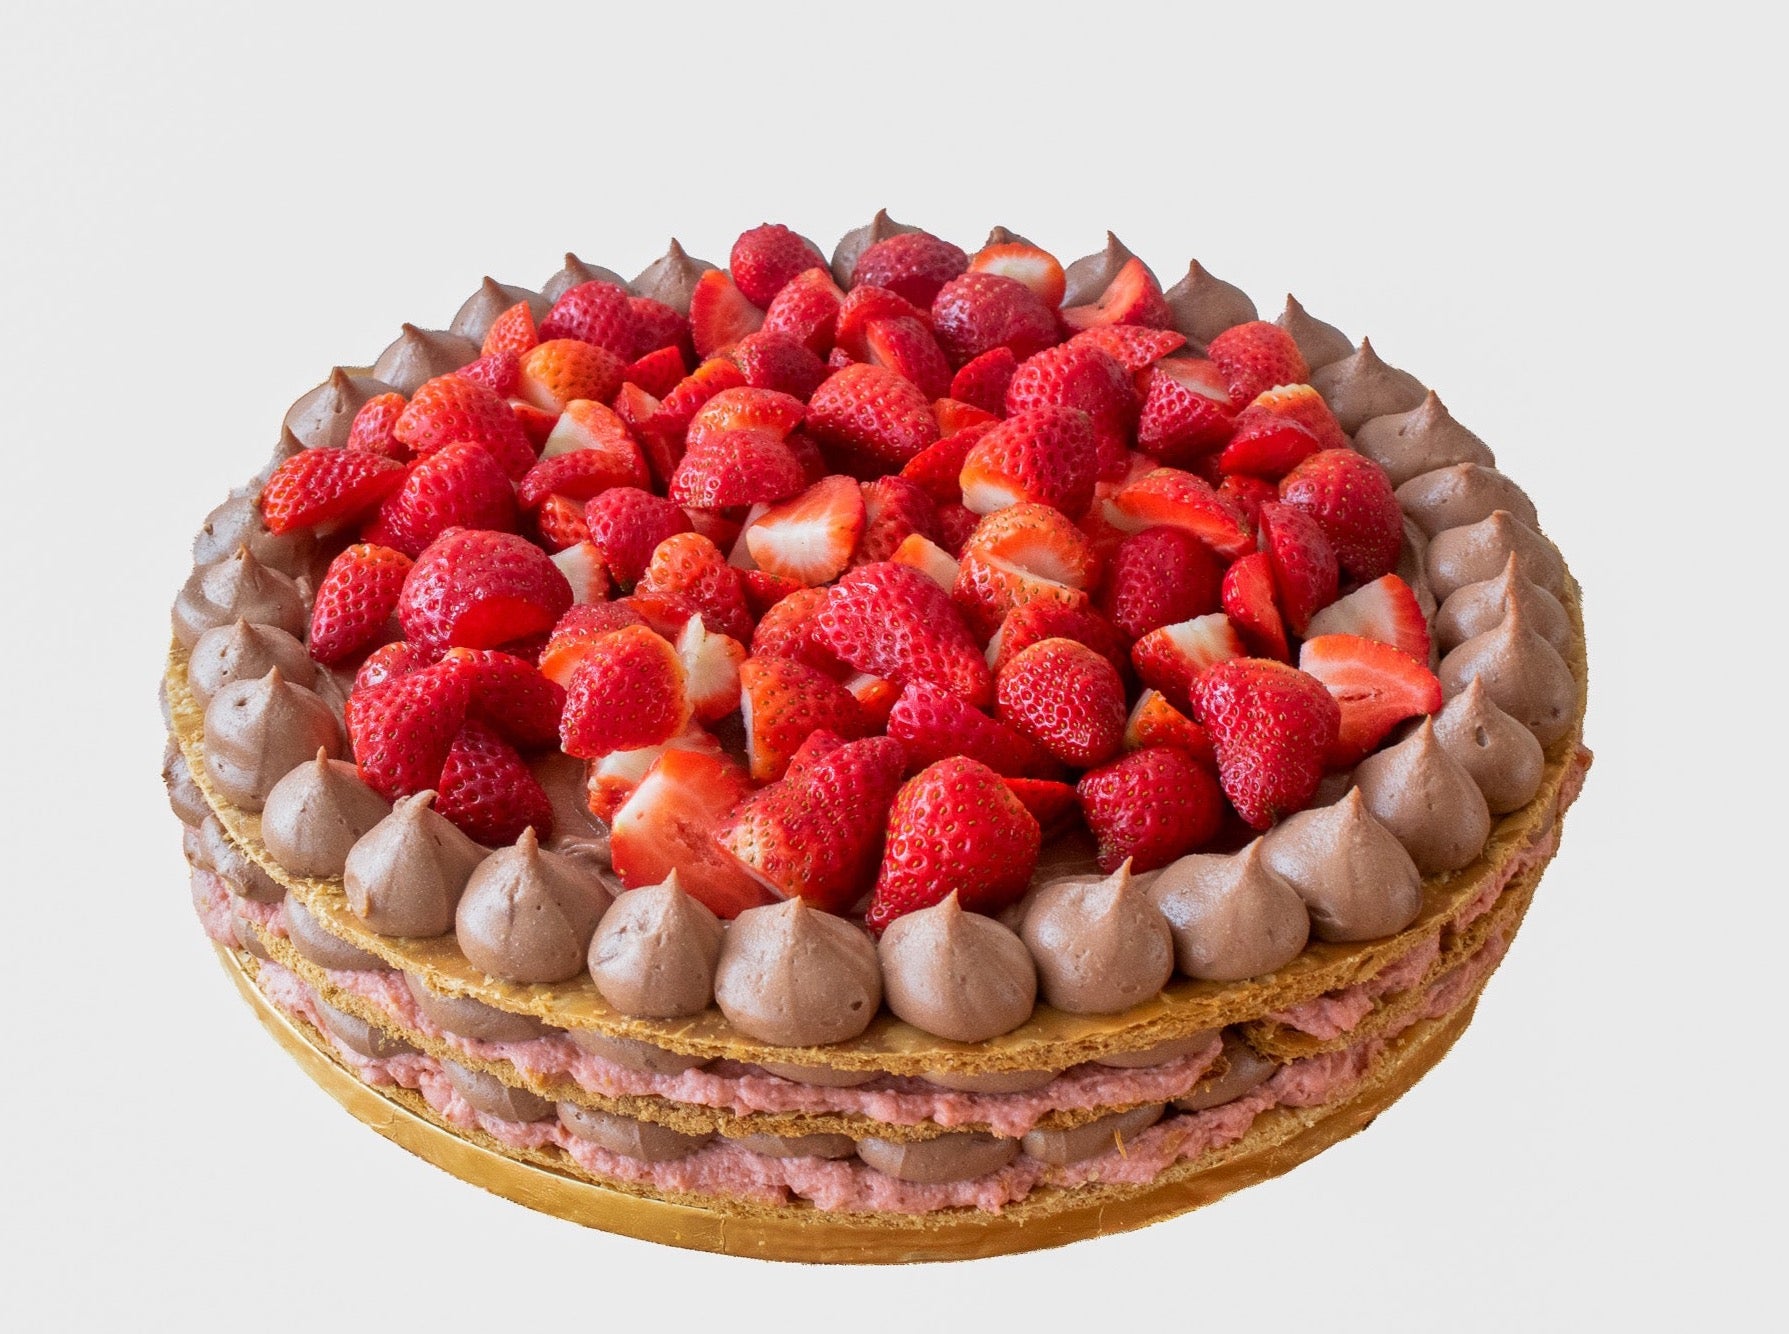 Chocolate mille-feuille cake (16 inch)